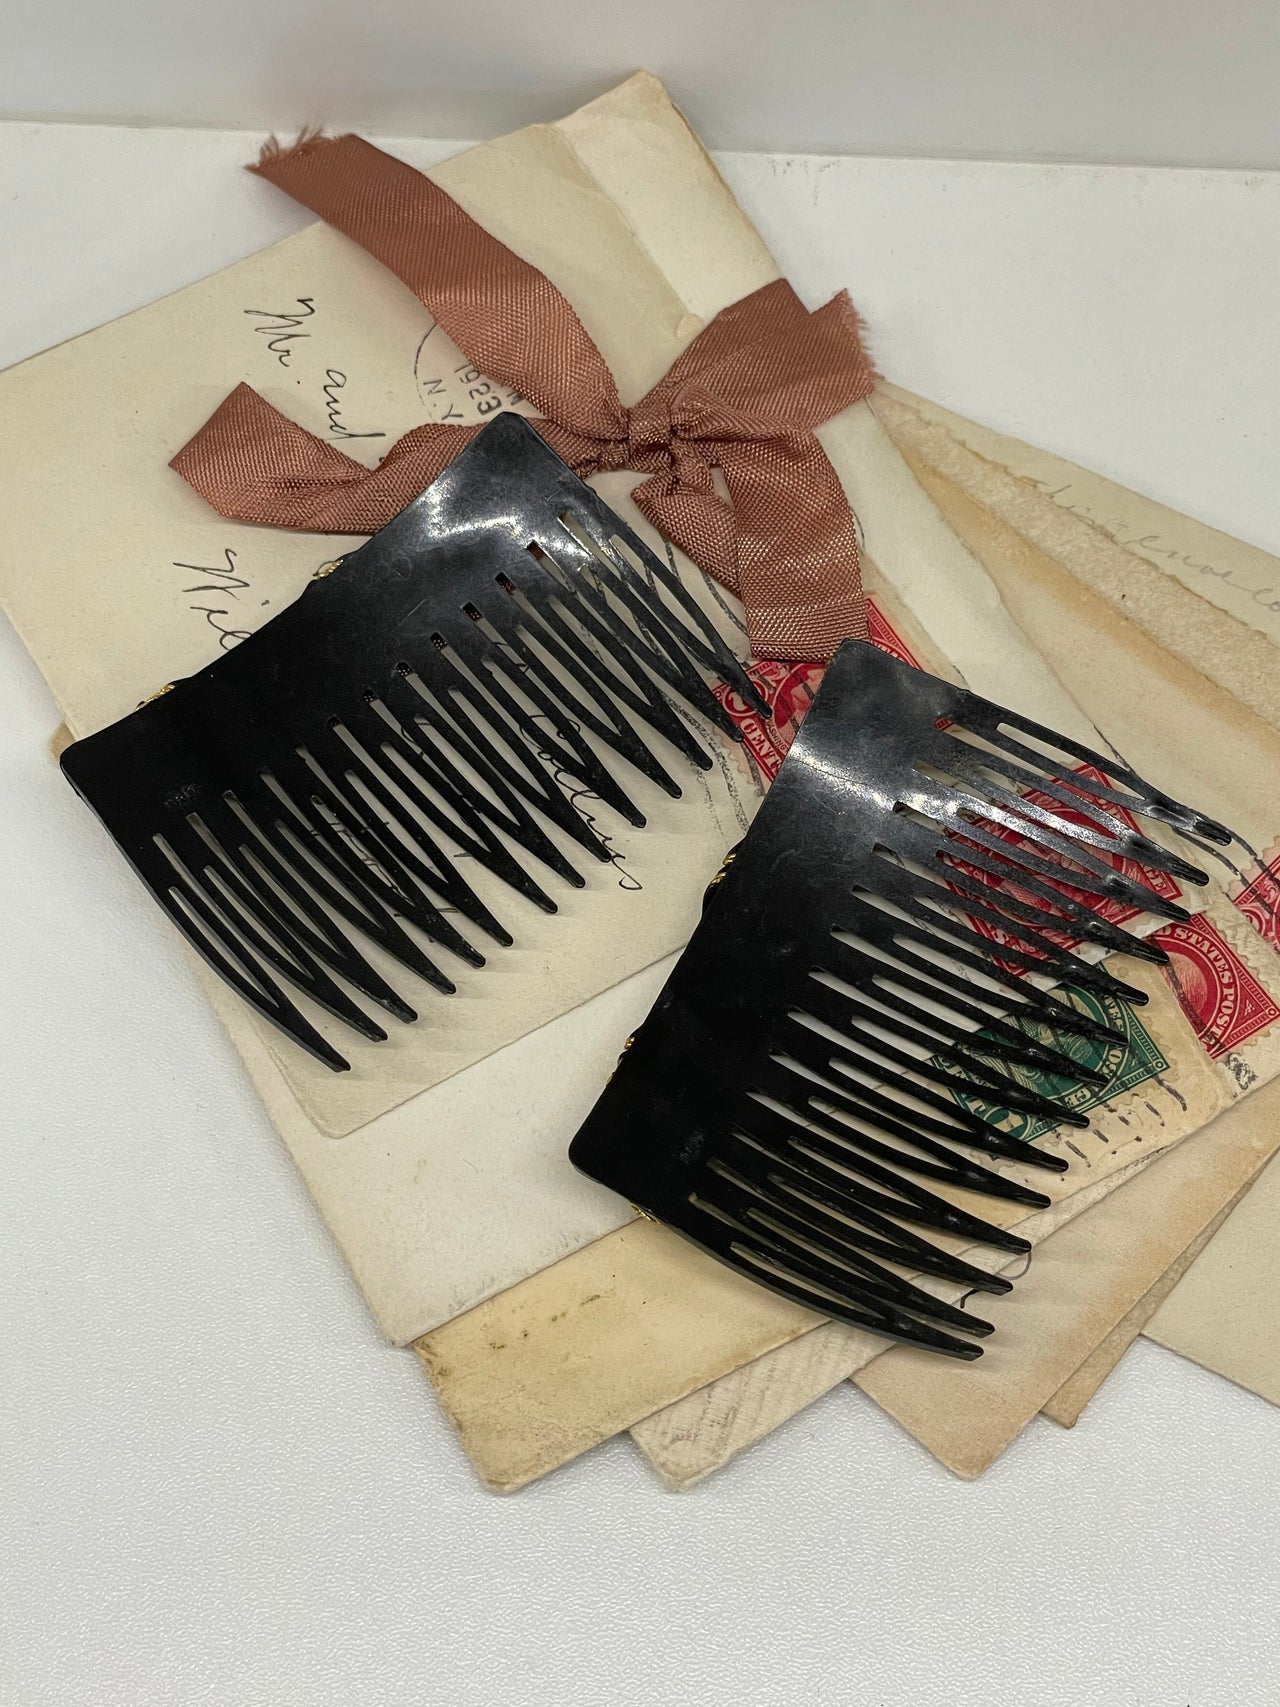 Black and Gold Hair Combs Bloomers and Frocks 